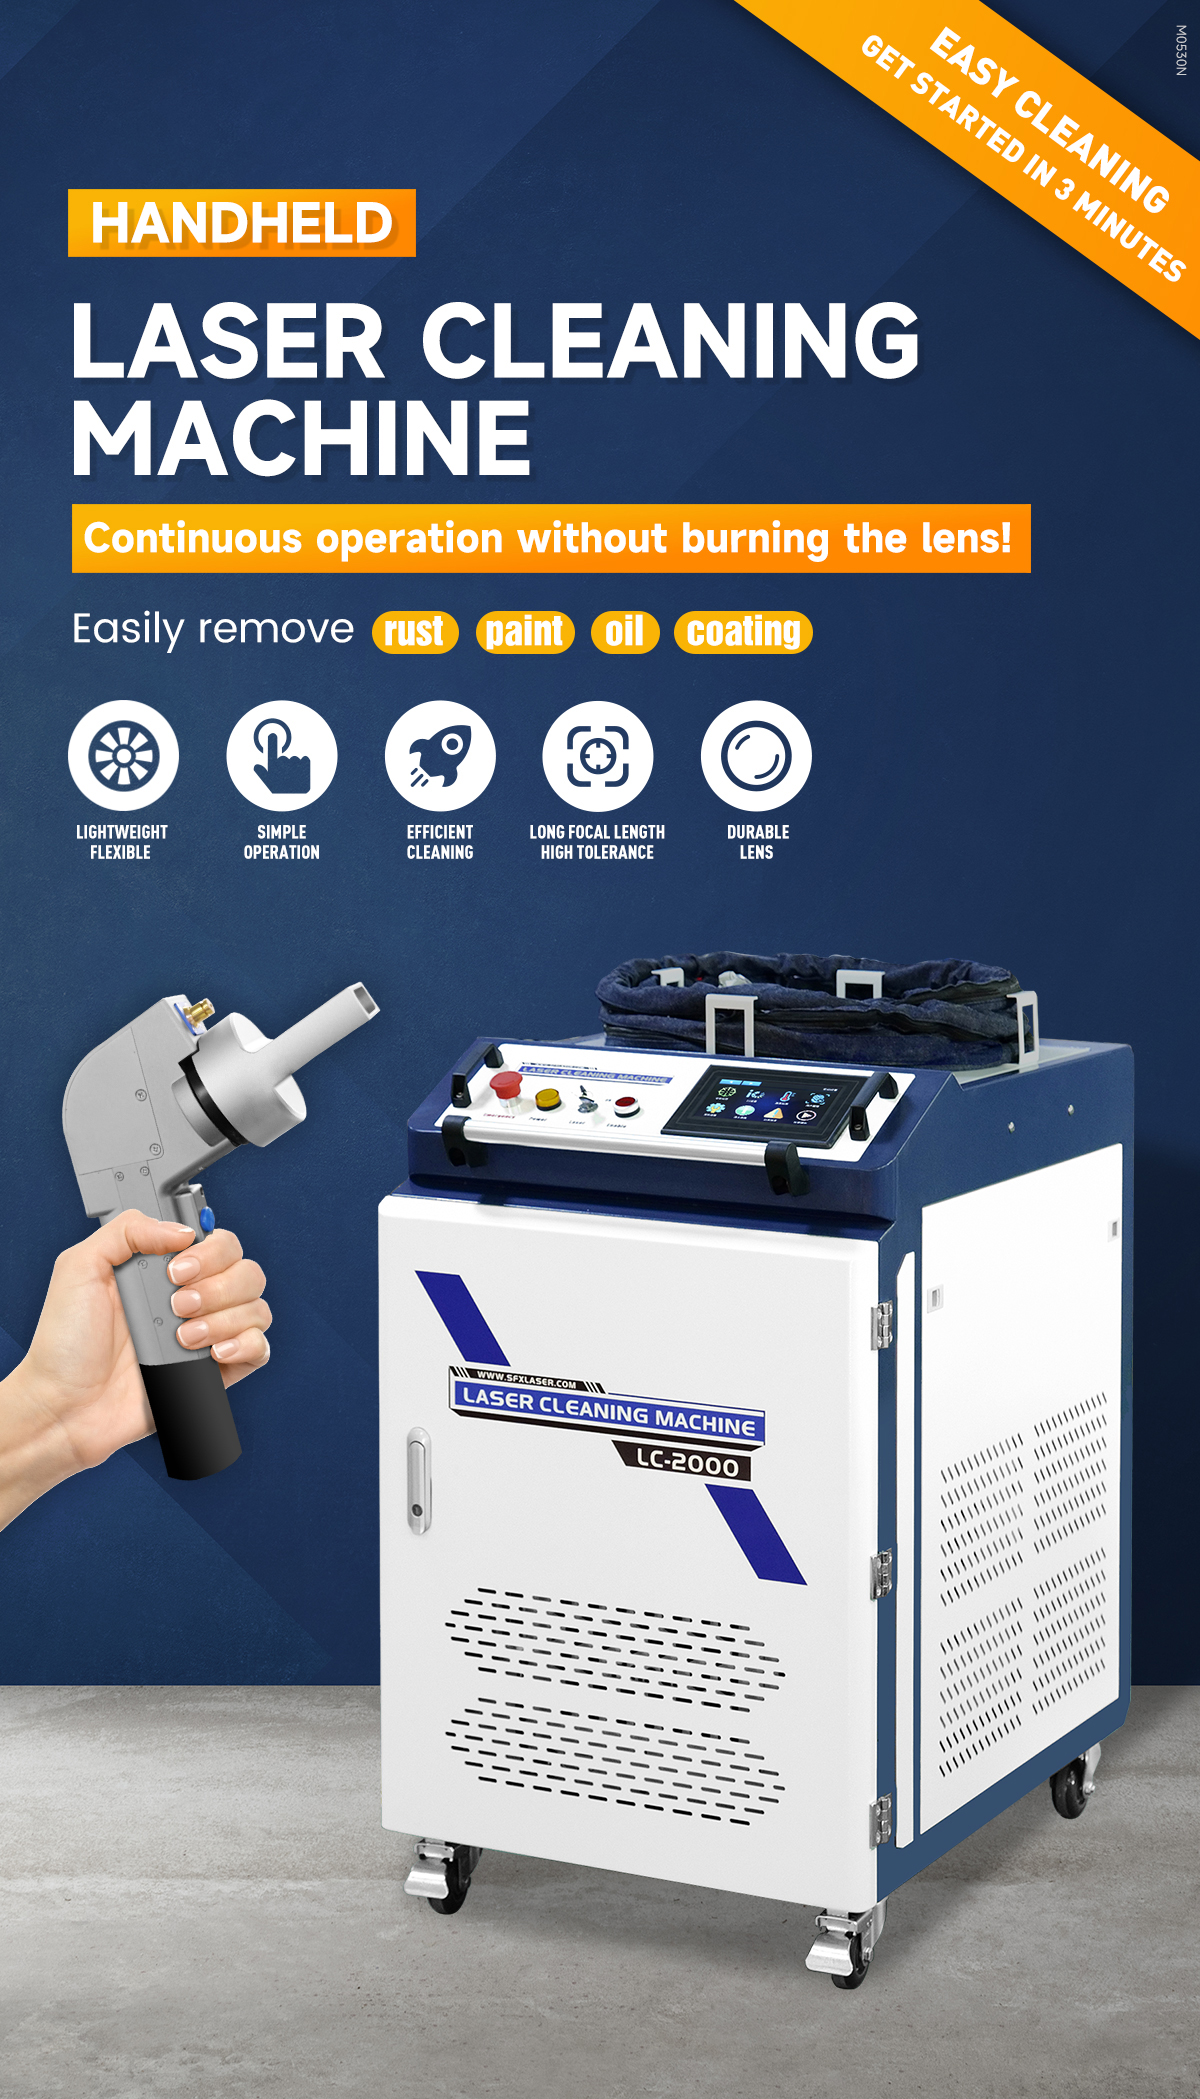 Specail Deal SFX US Stock 2000W JPT Laser Cleaning Machine For Rust Removal Painting Stripping Coating Removal High Efficiency SFX US Stock 2000W JPT Laser Cleaning Machine For Rust Removal Painting Stripping Coating Removal High Efficiency sfx laser,sfx JPT laser cleaning machine,2000w laser cleaning machine,Rust Remover Machine,Painting Remover,Laser Rust Removal machine for sale,rust removal laser cleaner,portable handheld laser cleaning machine,laser rust removal machine for sale,laser cleaning machine for sale